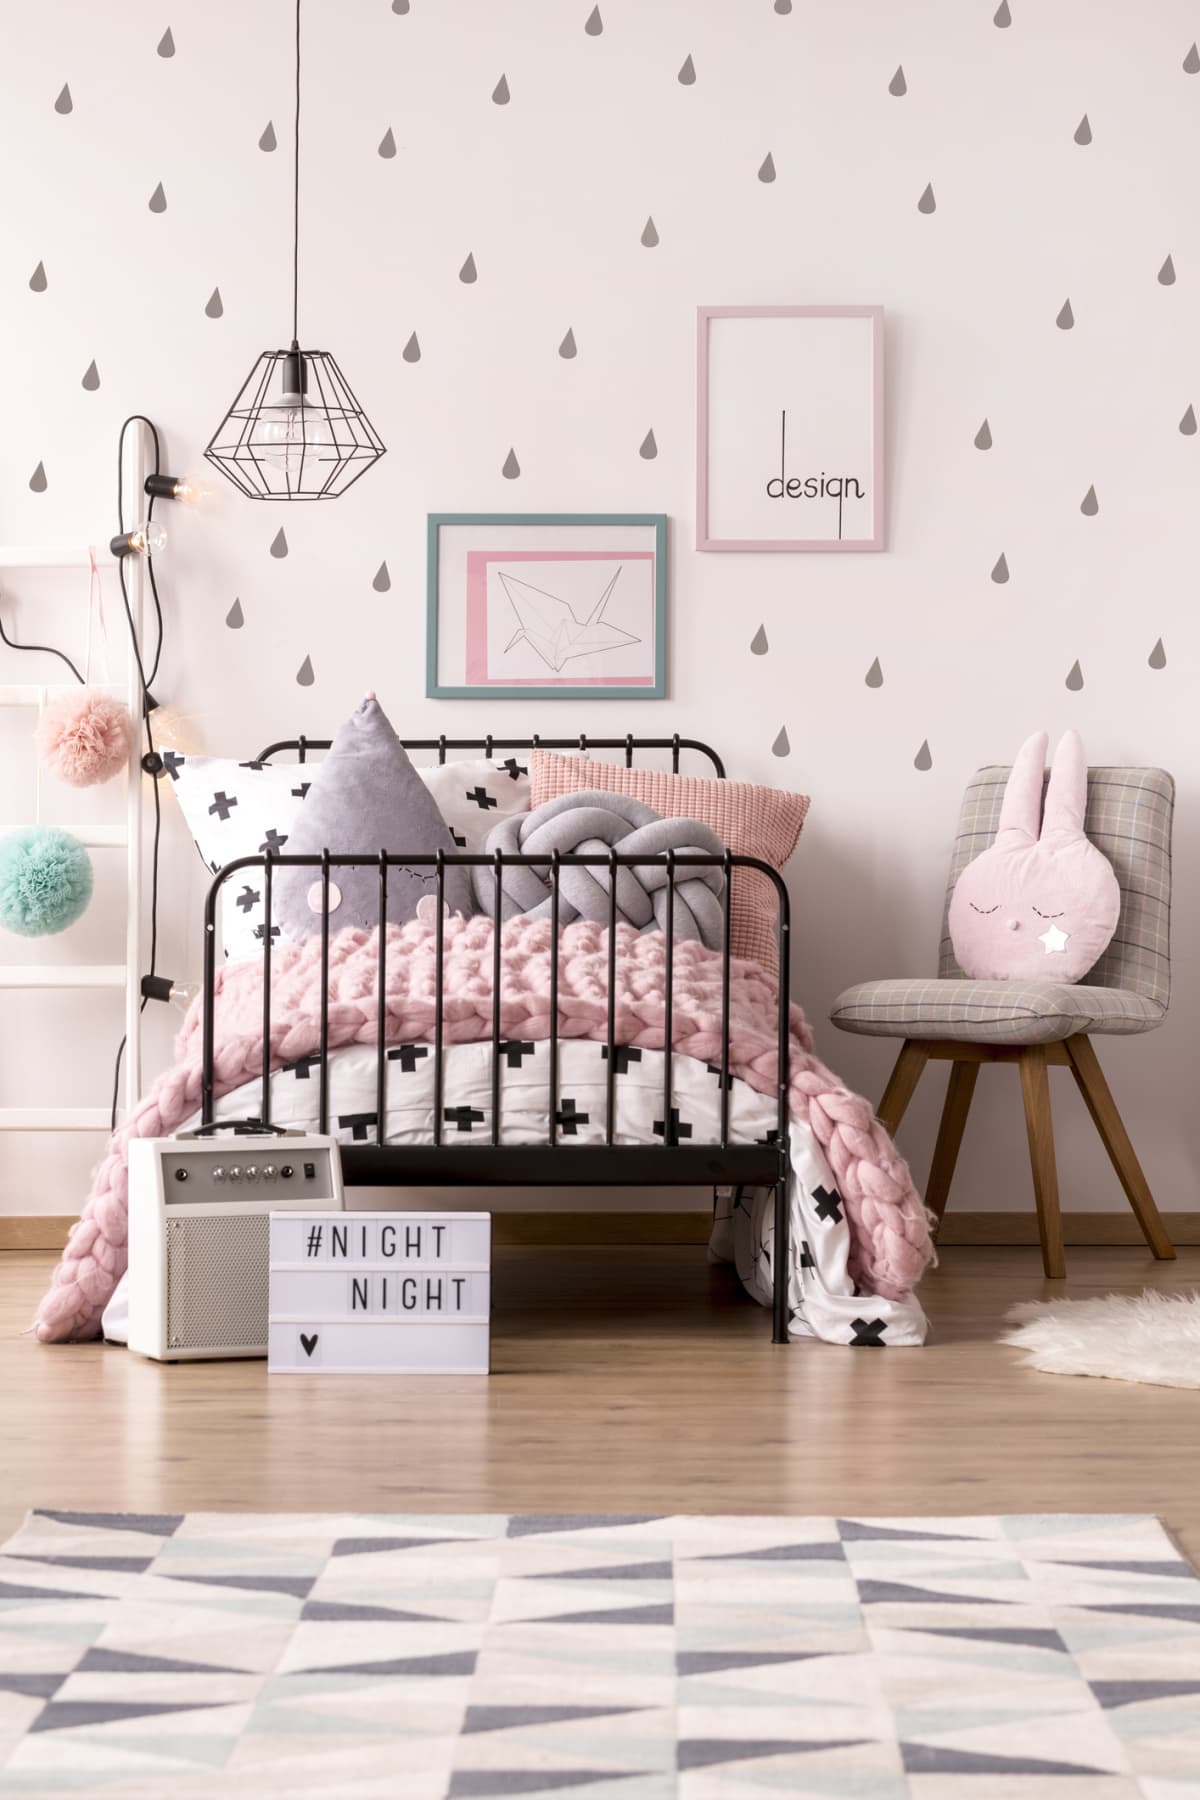 A pink bedroom with gray accents